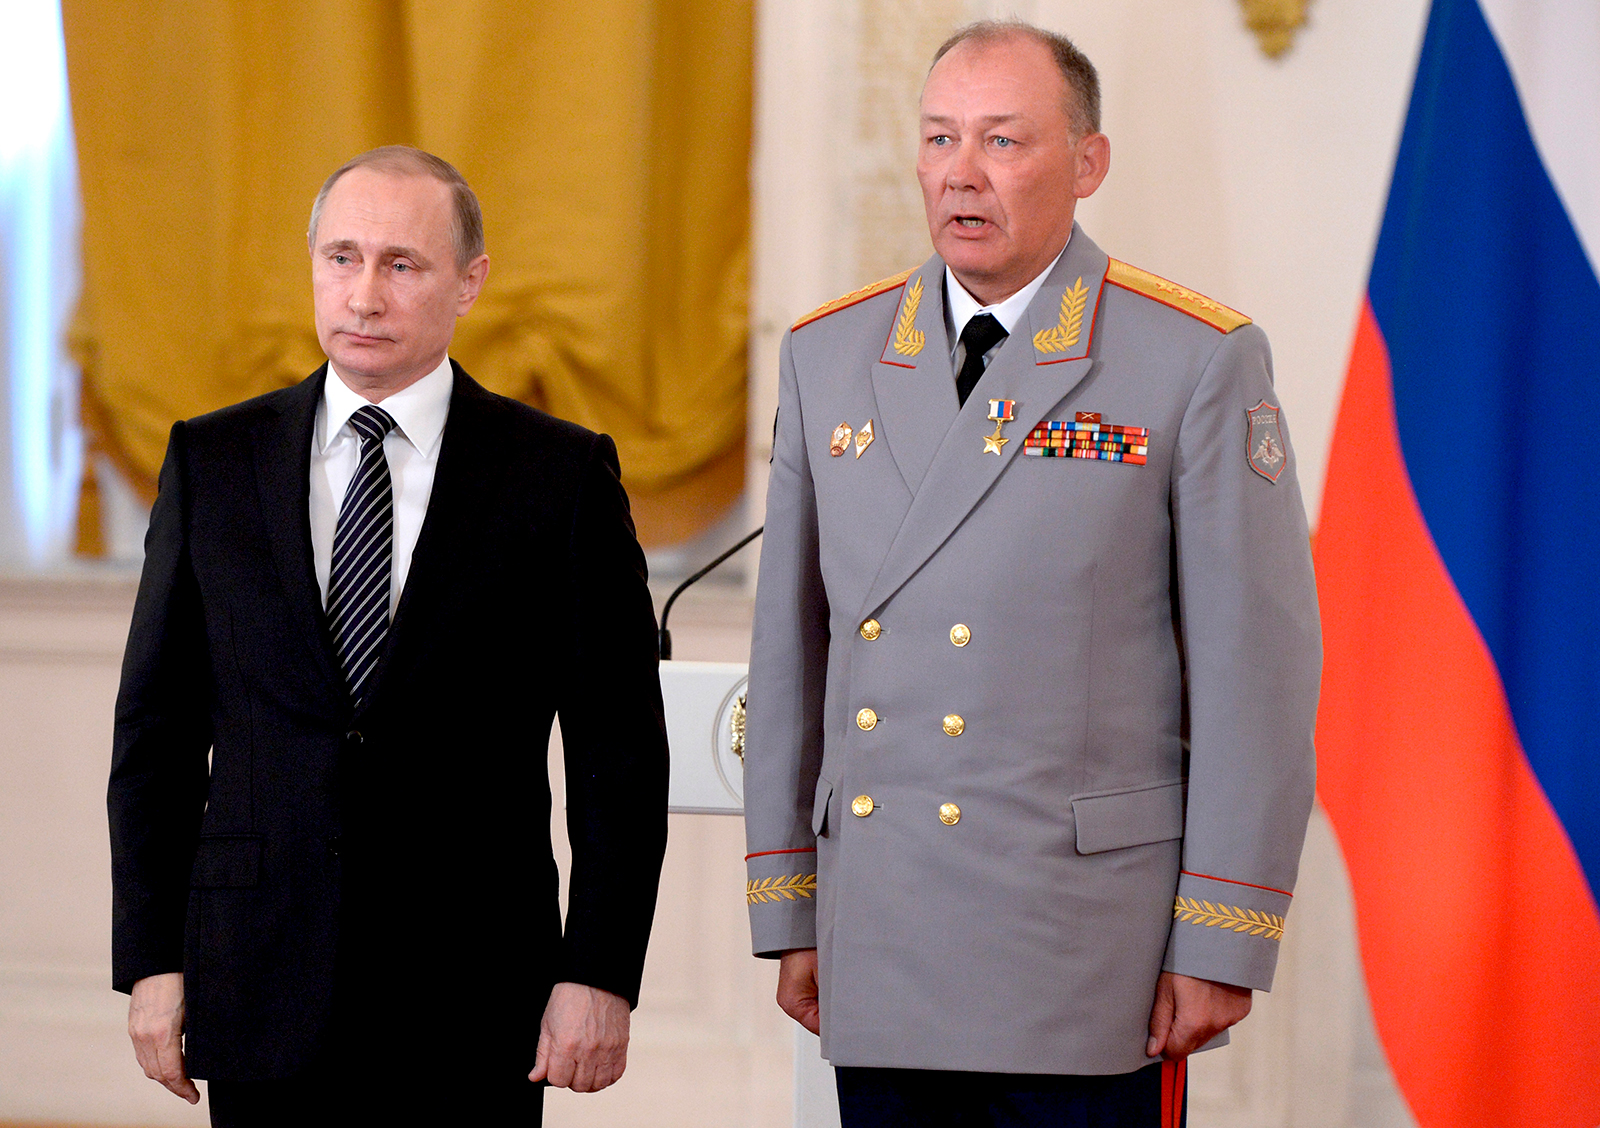 In this pool photo taken on Thursday, March 17, 2016, Russian President Vladimir Putin, left, poses with Col. Gen. Alexander Dvornikov during an awarding ceremony in Moscow's Kremlin, Russia. 